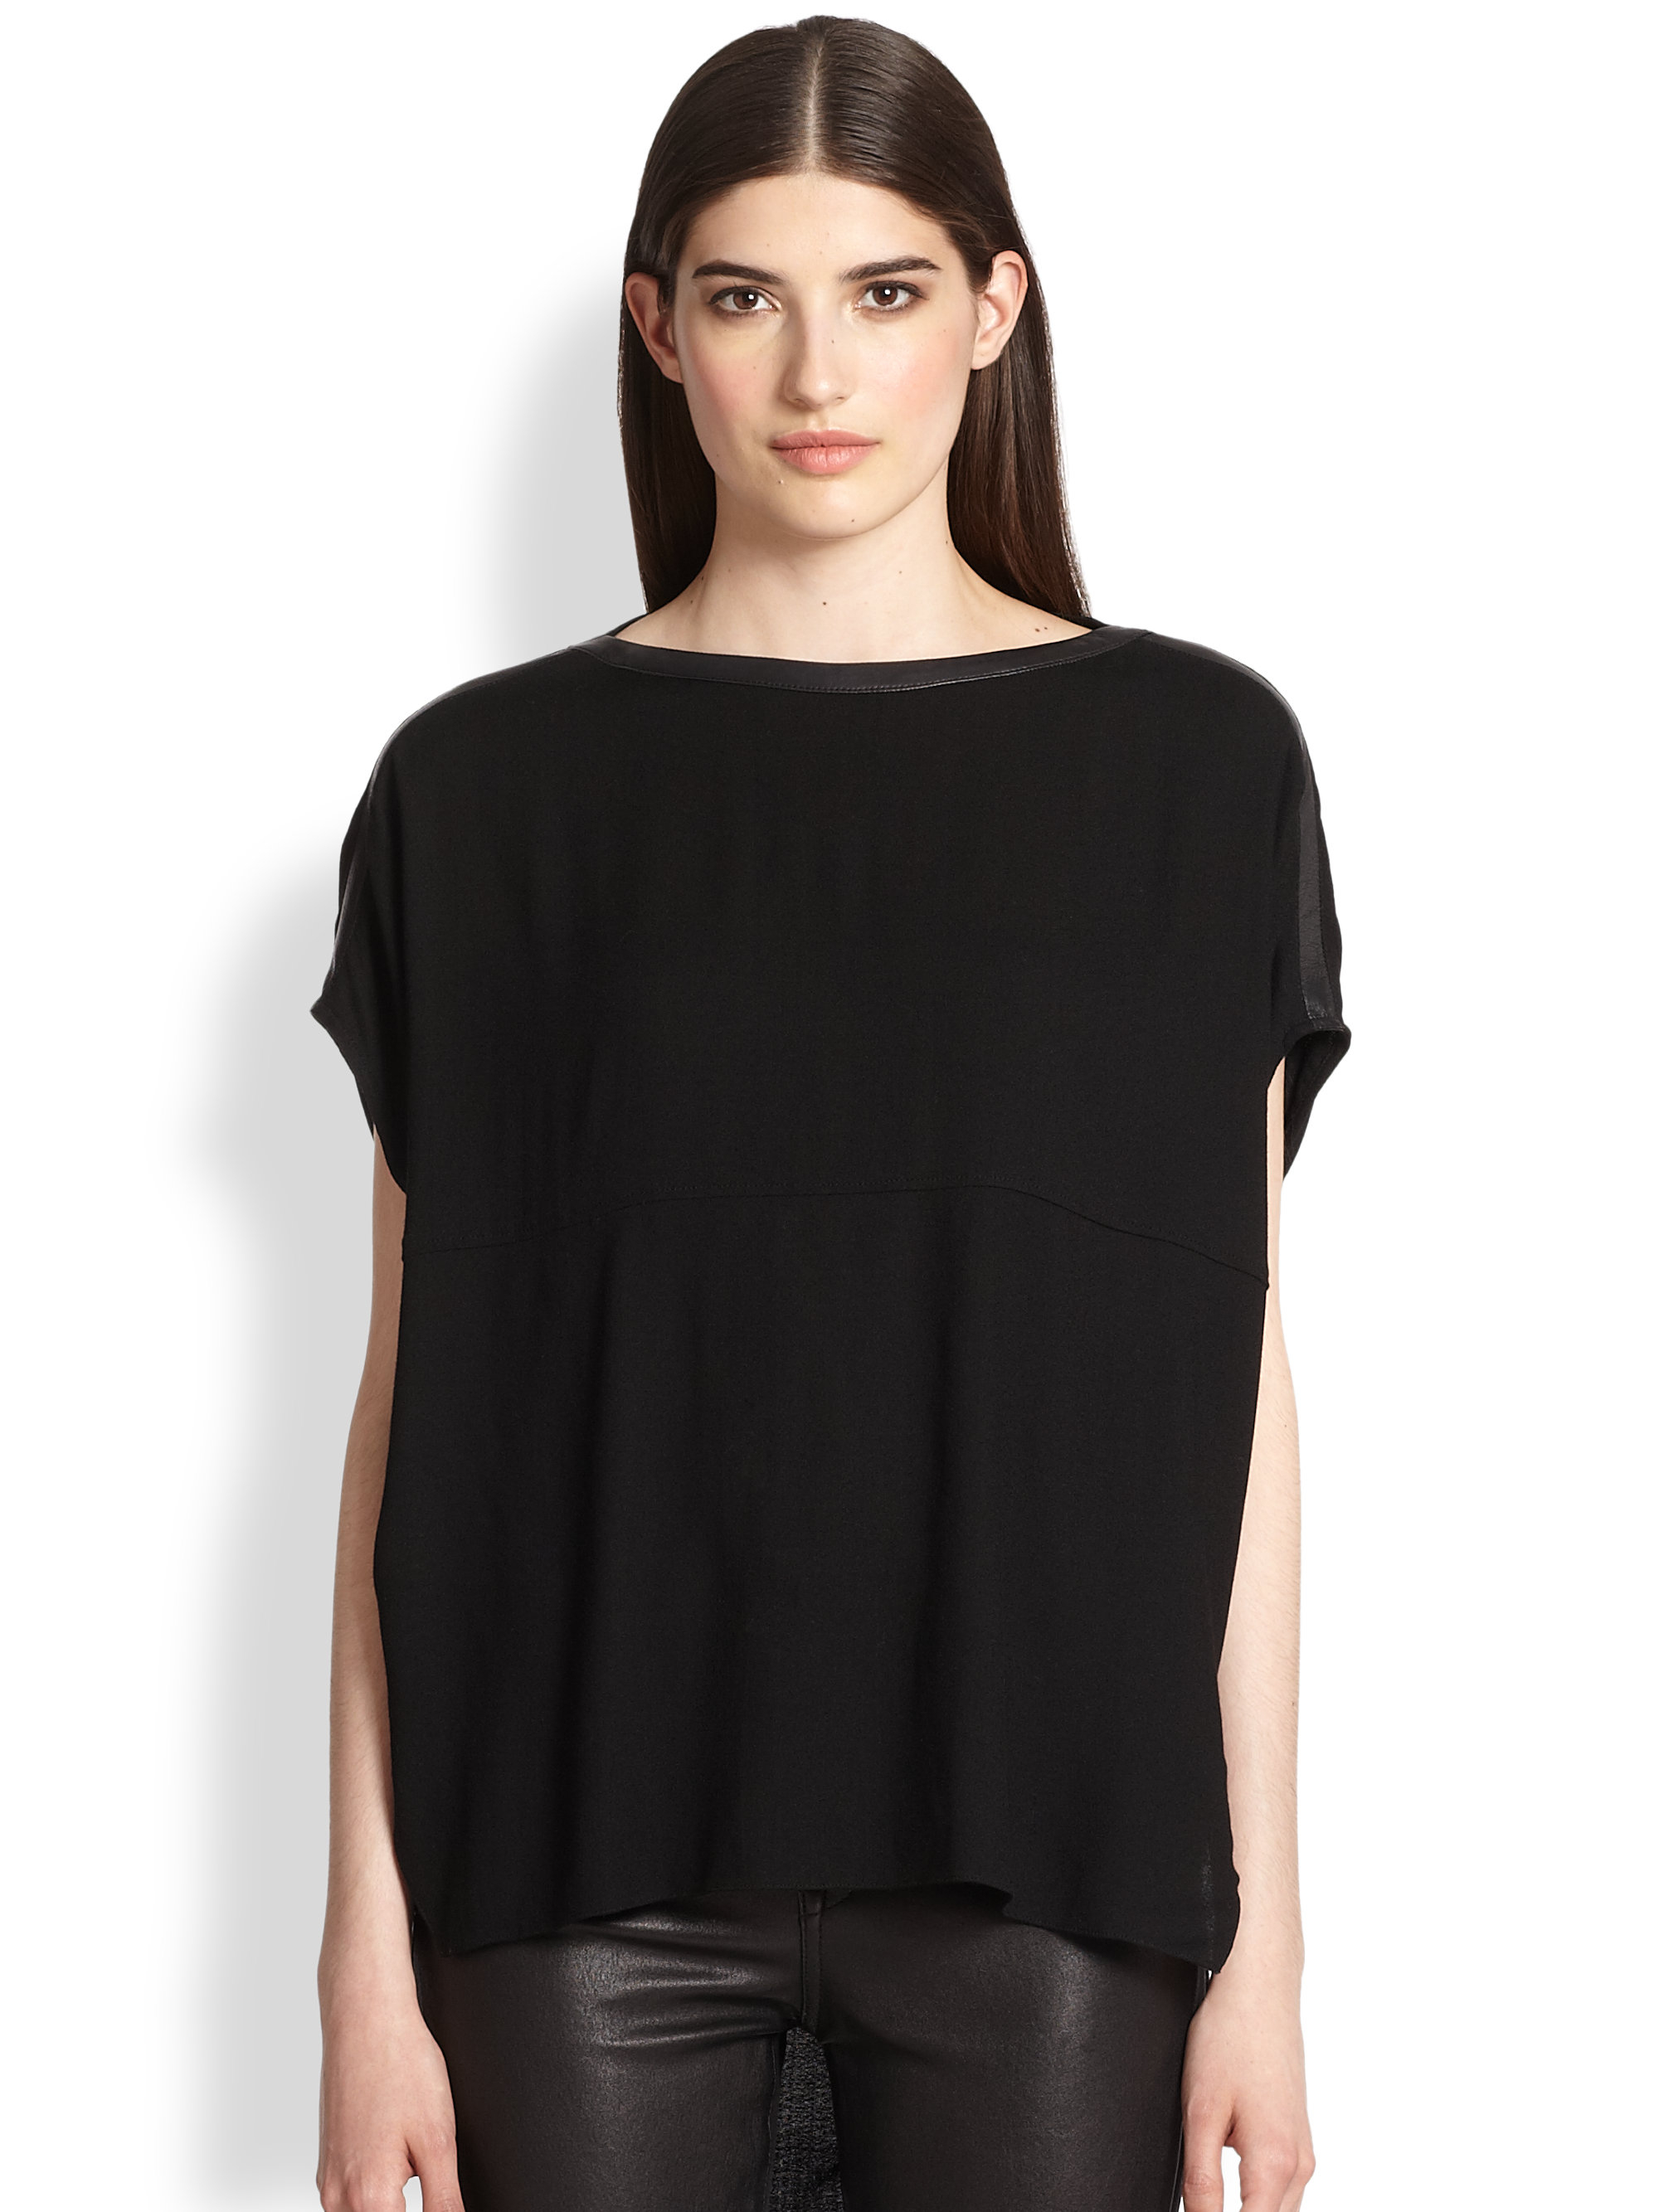 Helmut Lang Leather-Trimmed Boxy Hi-Lo Top in Black - Lyst